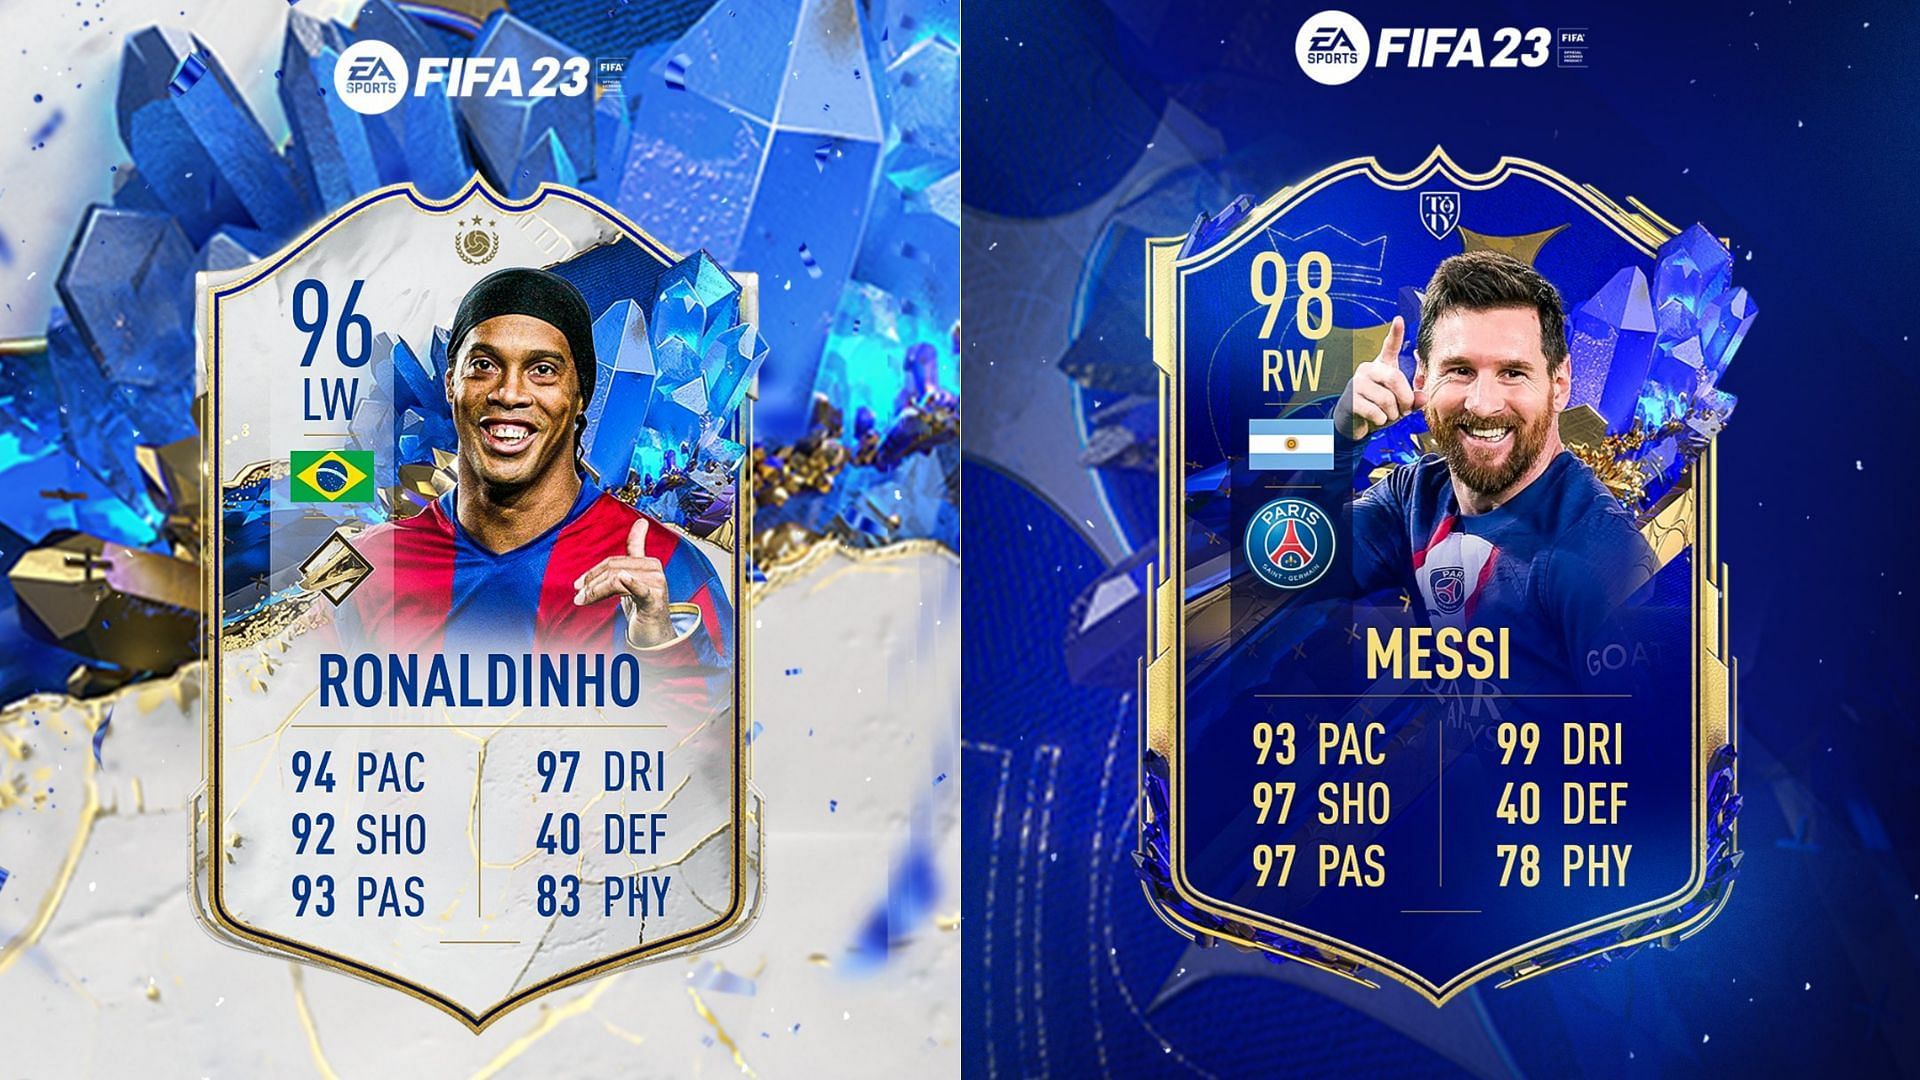 There have been some interesting leaks surrounding the TOTY promo (Images via Twitter/FUT SHeriff)